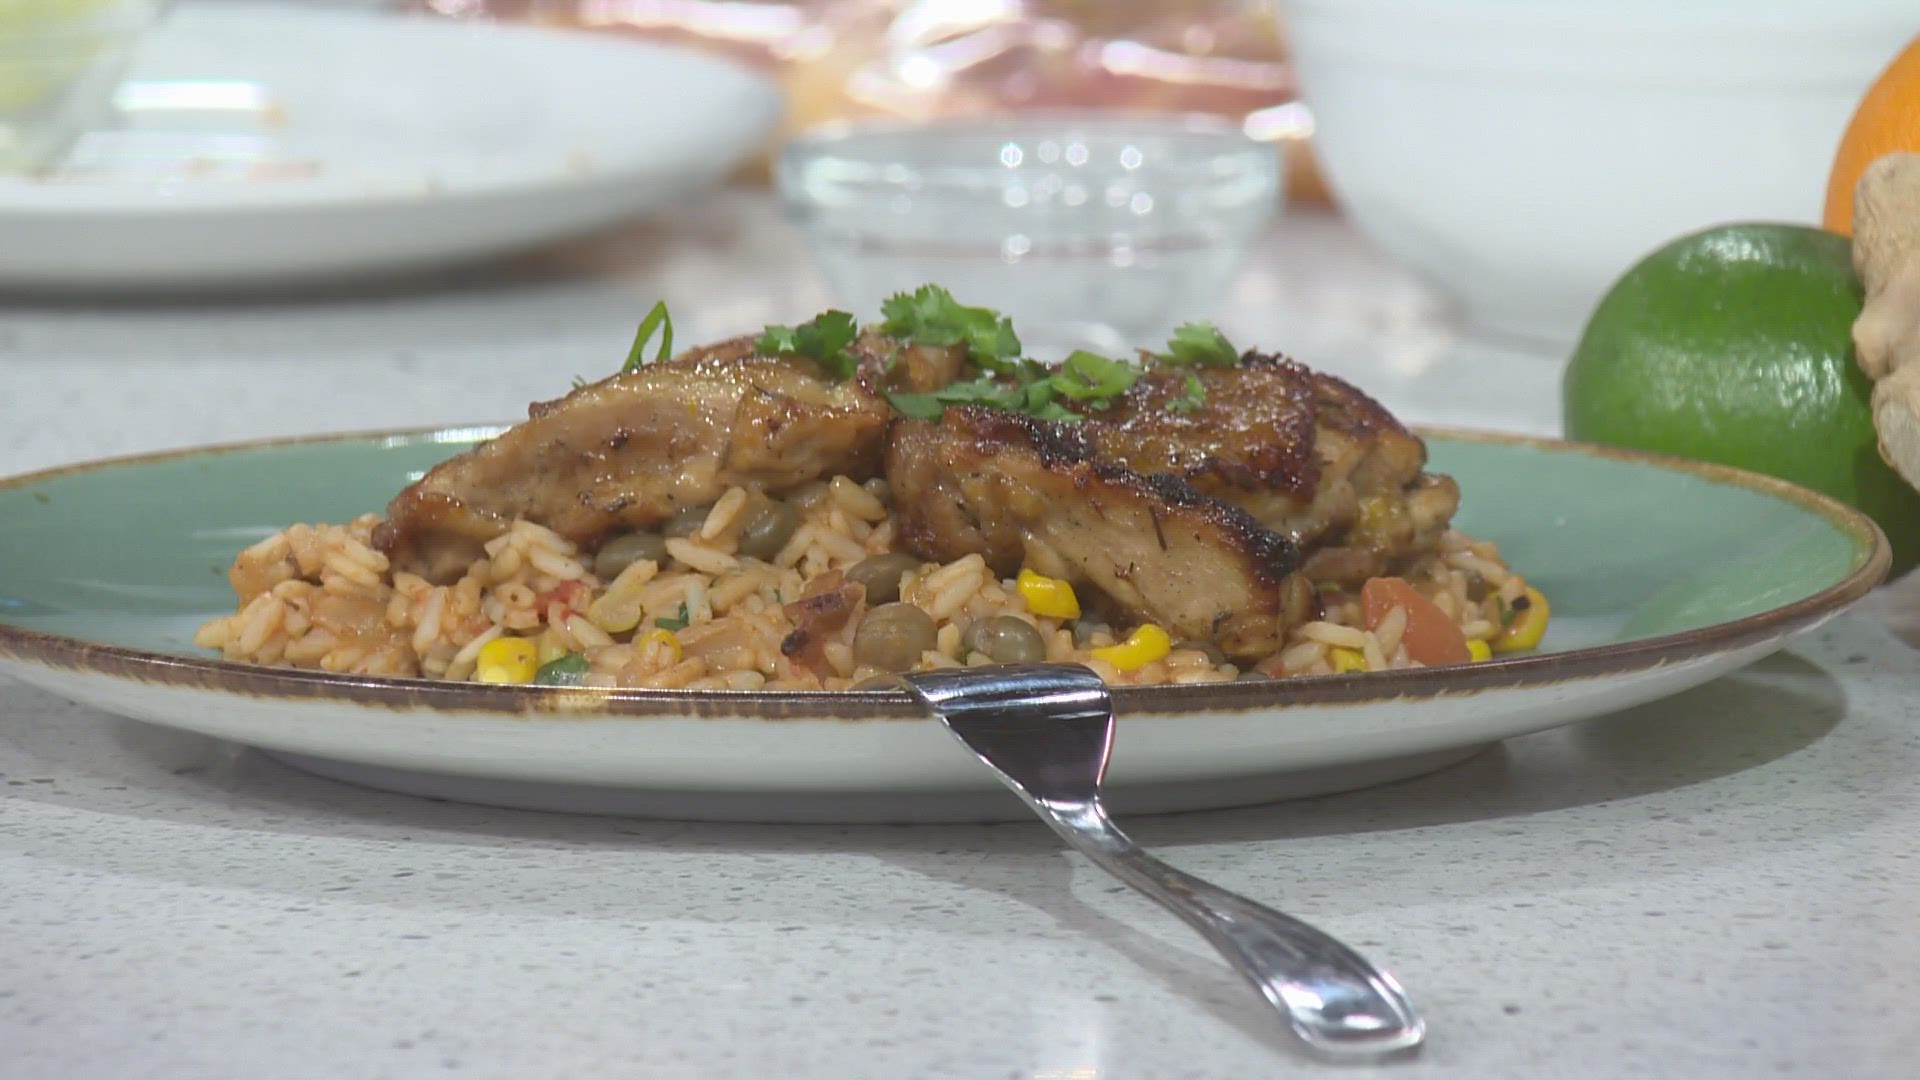 Chef Belton is celebrating Caribbean Heritage Month by making spicy glazed Caribbean chicken & pigeon peas and rice.